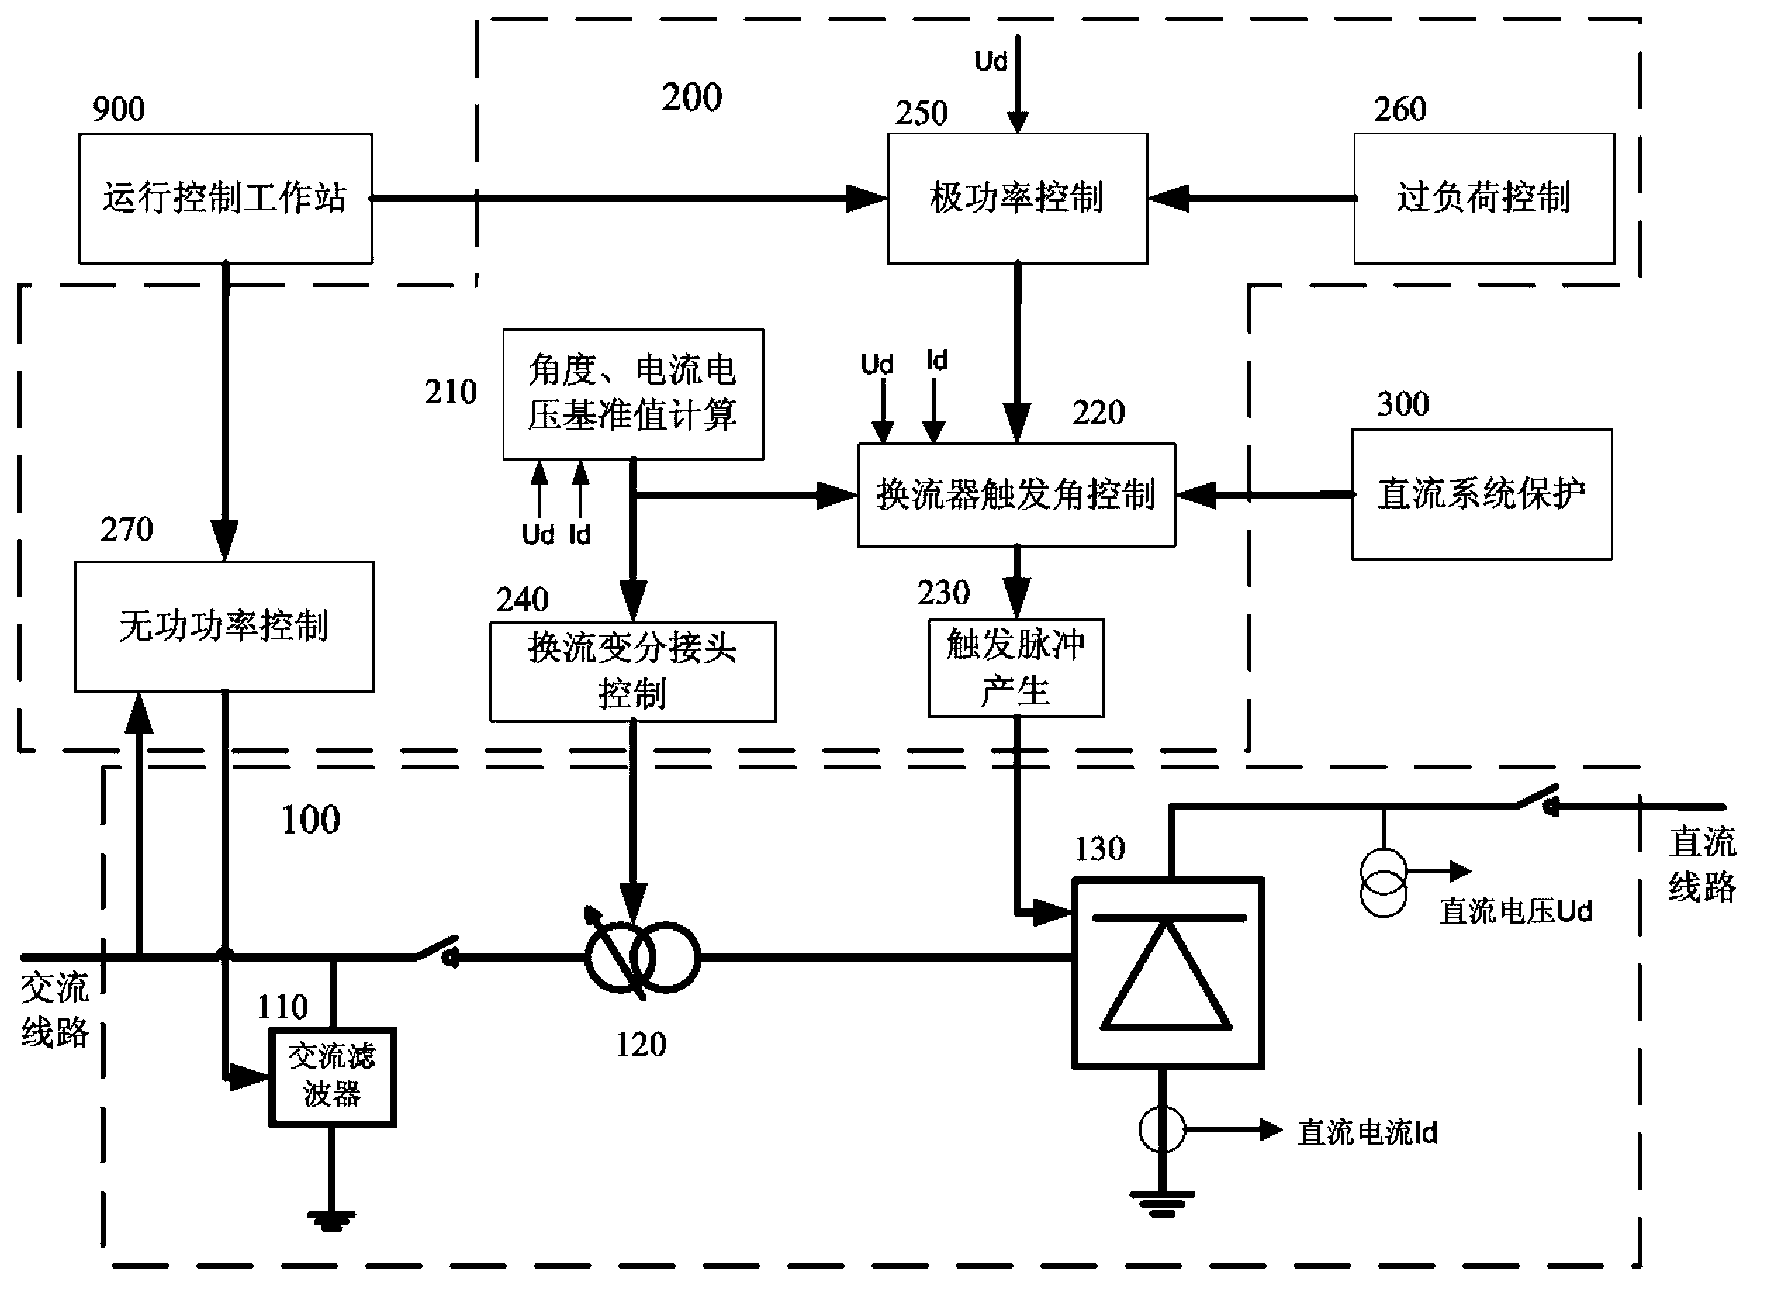 Simulator for minimum trigger angle limiter of rectifier